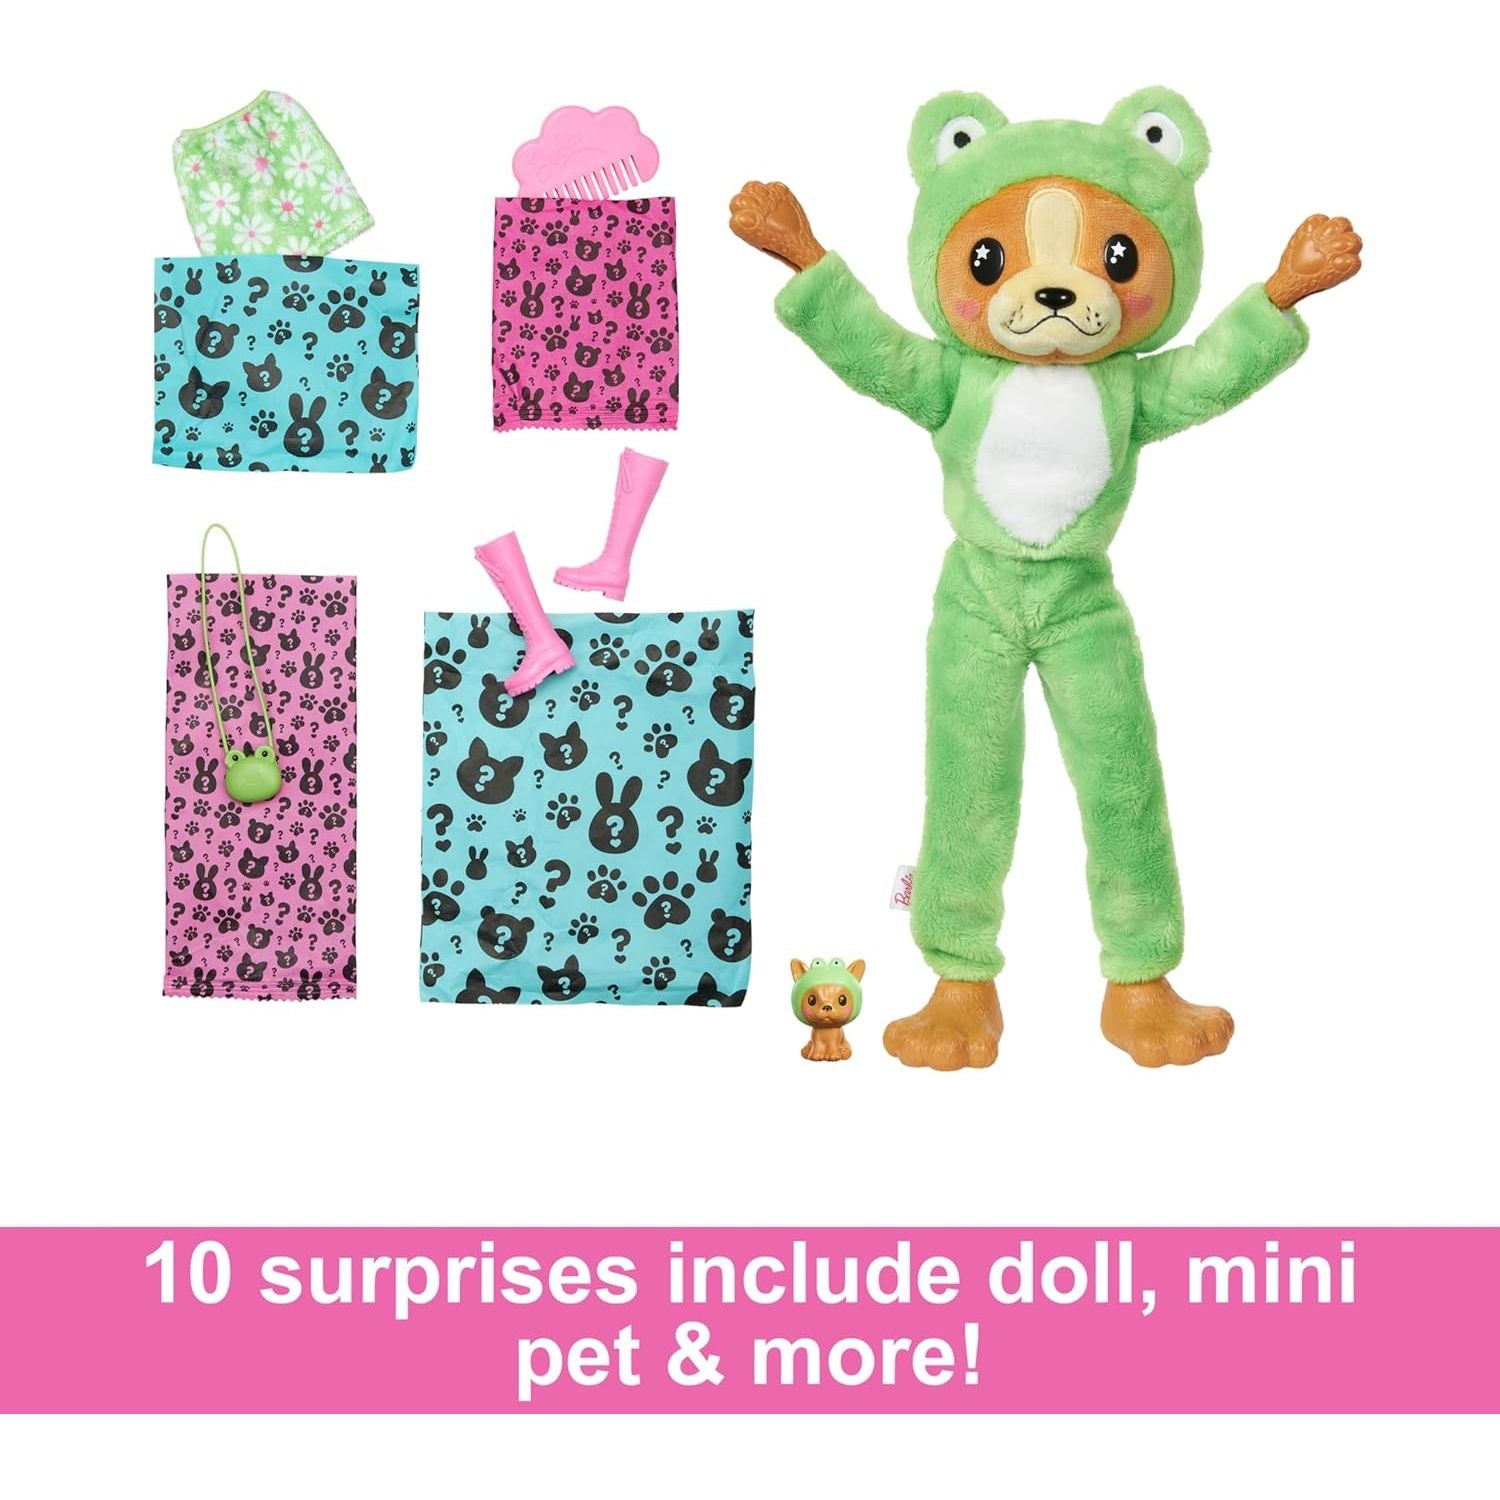 Barbie Cutie Reveal Doll & Accessories with Animal Plush Costume & 10 Surprises Including Color Change, Puppy as Frog in Costume-Themed Series